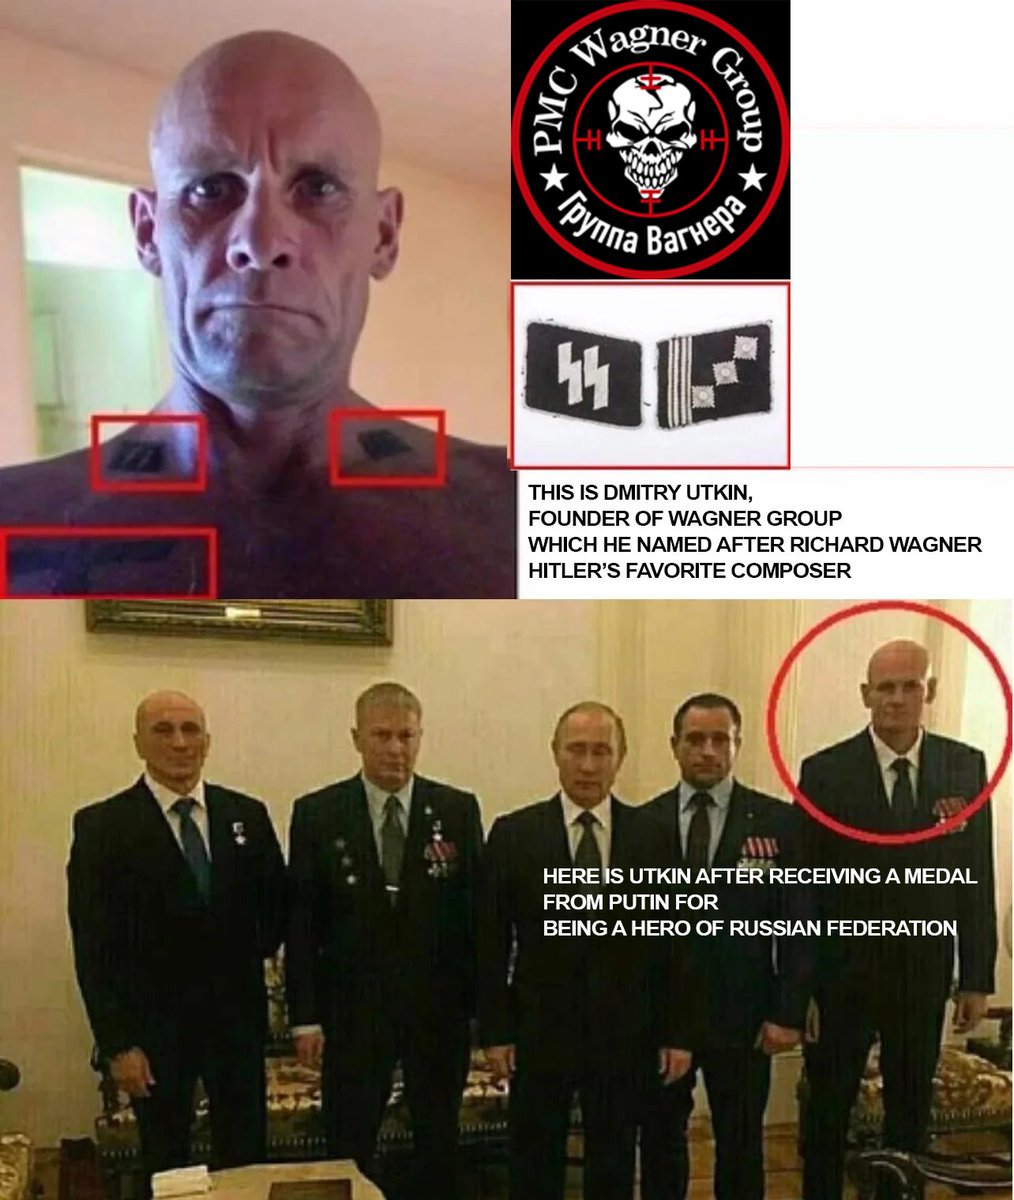 @BergioJewelry Are you aware that your company sells tshirts that glorify a terrorist group, Wagner PMC, which murders, rapes and tortures Ukrainians on behalf of Russian Federation.